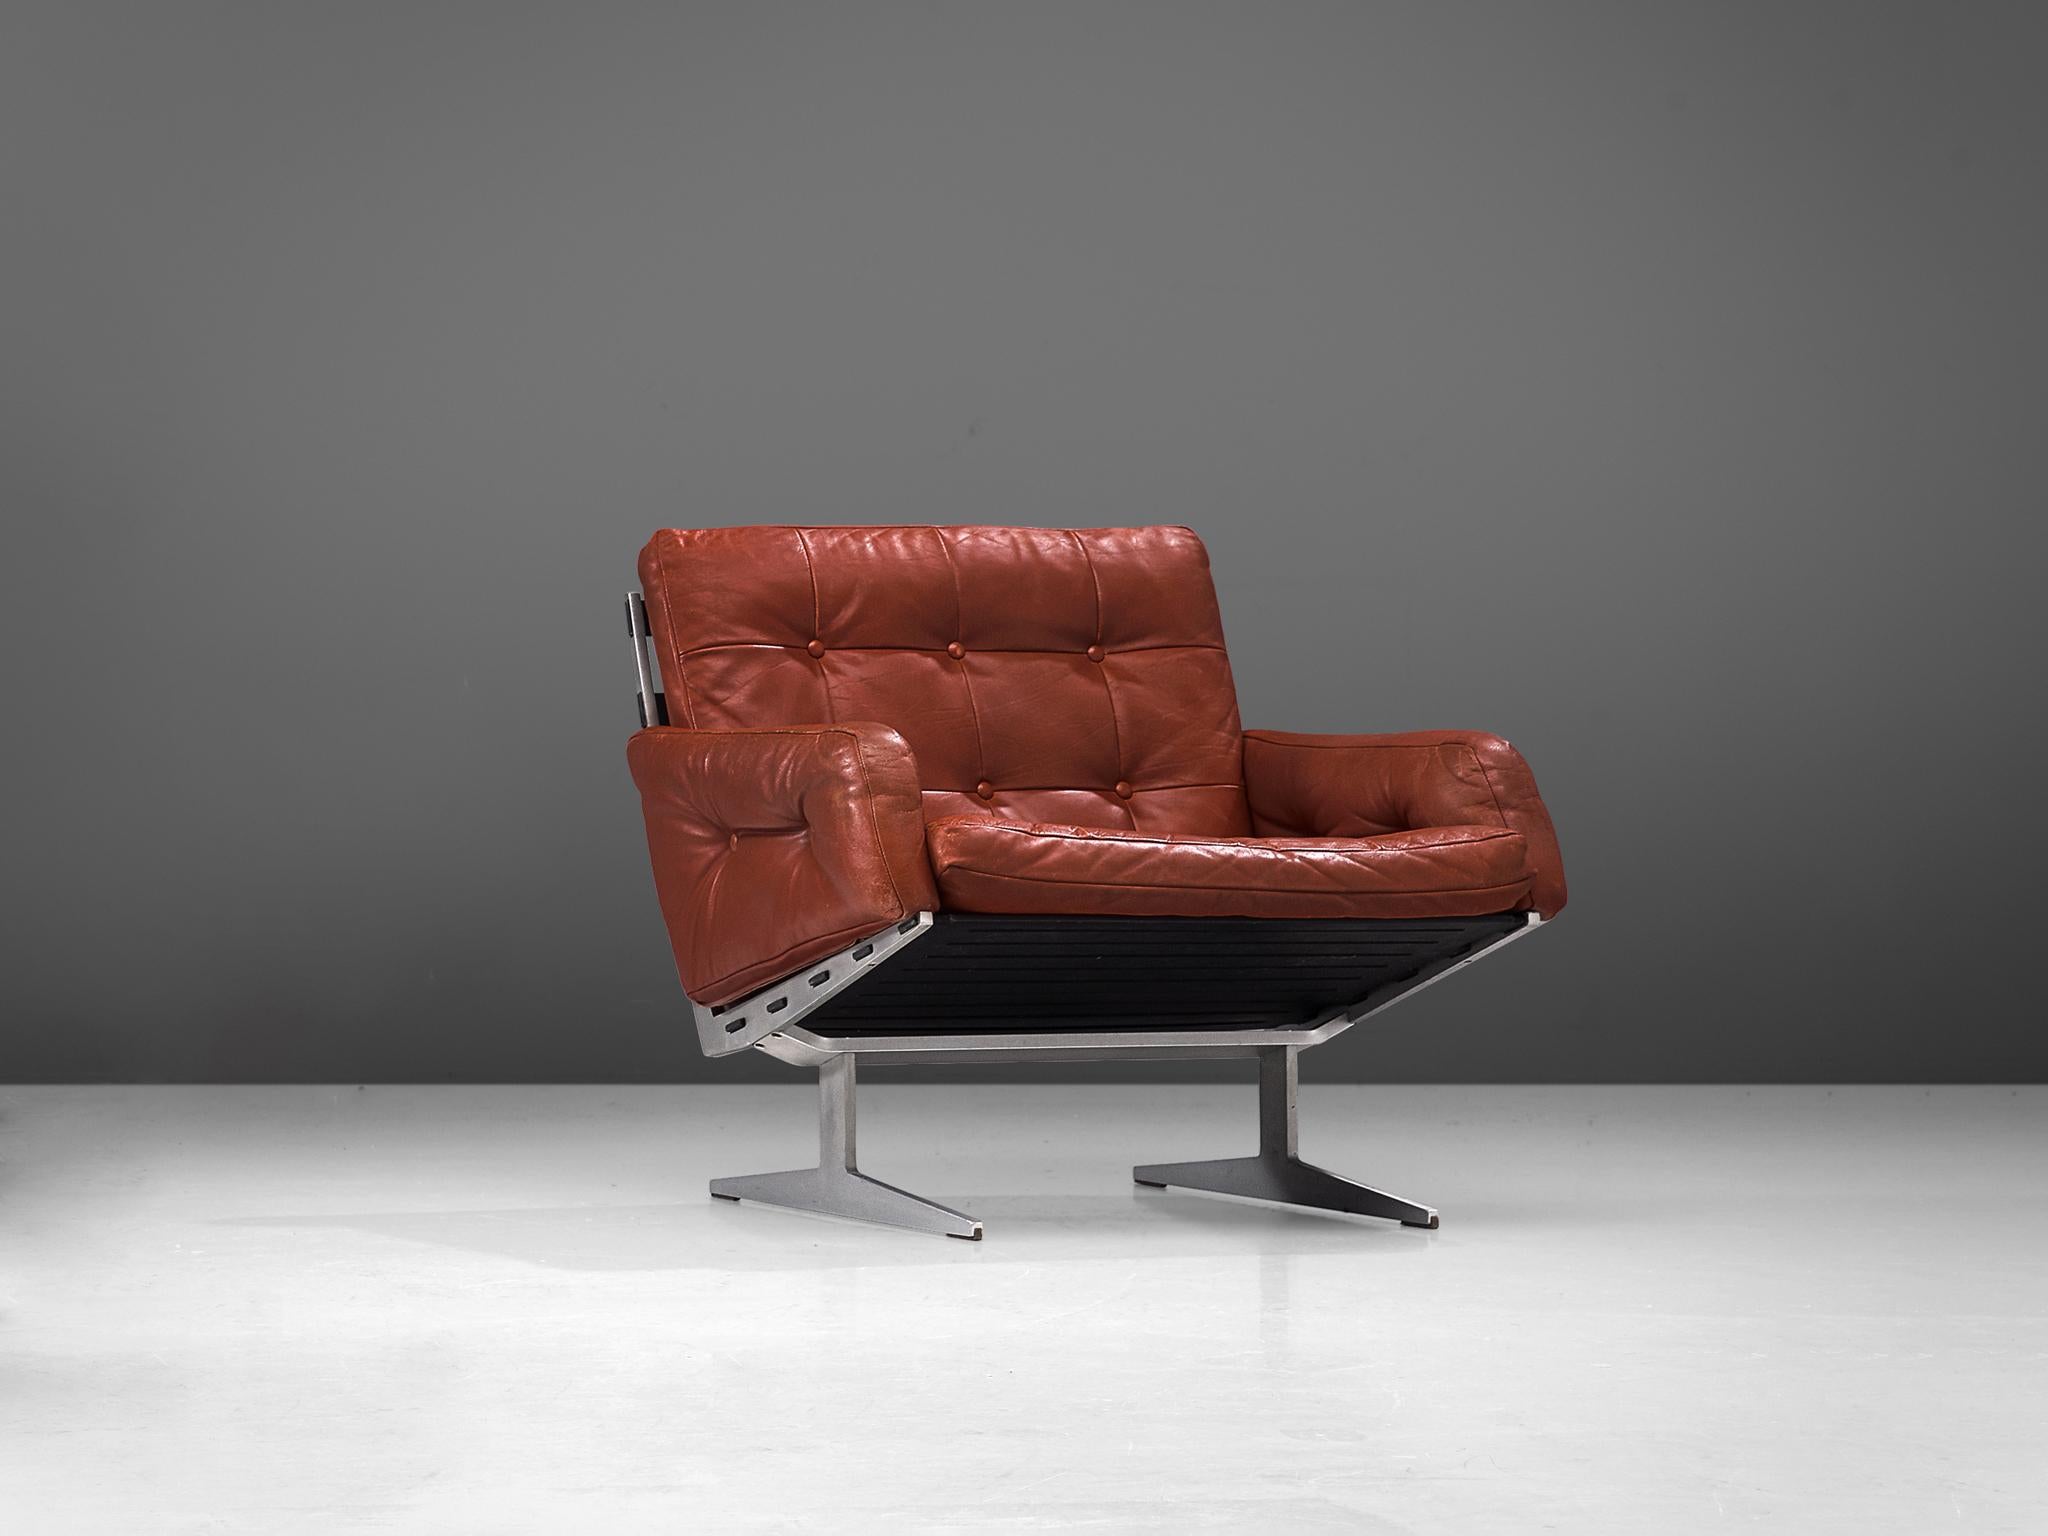 Paul Leidersdorff for Cado, 'Caravelle' lounge chair, leather, aluminum and wood, Denmark, 1960s

Modern armchair created by Paul Leidersdorff for Cado. The slipper chair holds a L-shaped seating, moreover, this shape is repeated in the legs. A